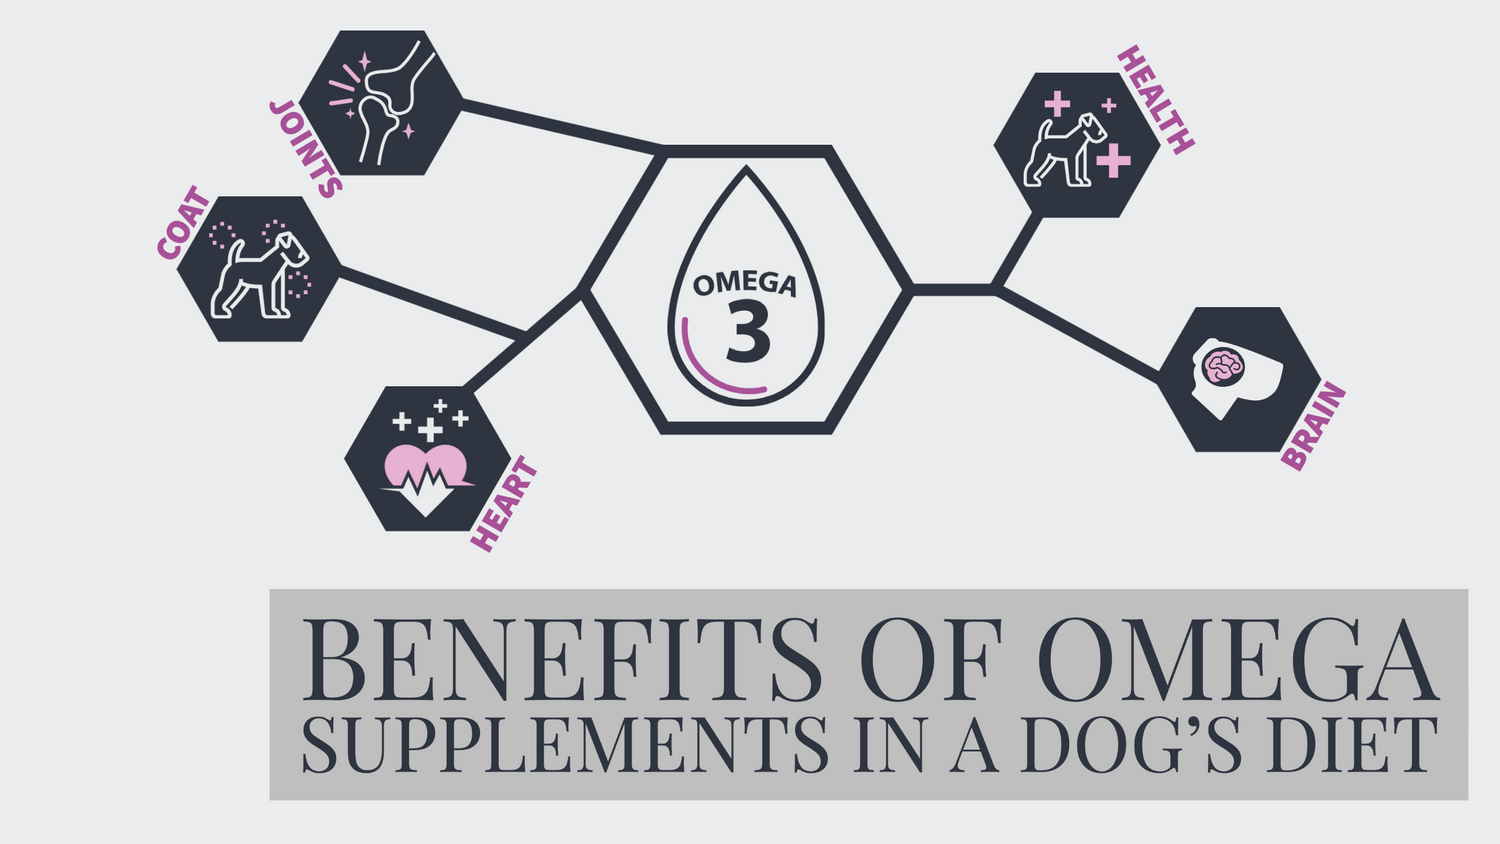 A molecule-shaped Icon with several other icon in it and a box with text “Benefits of Omega Supplement”